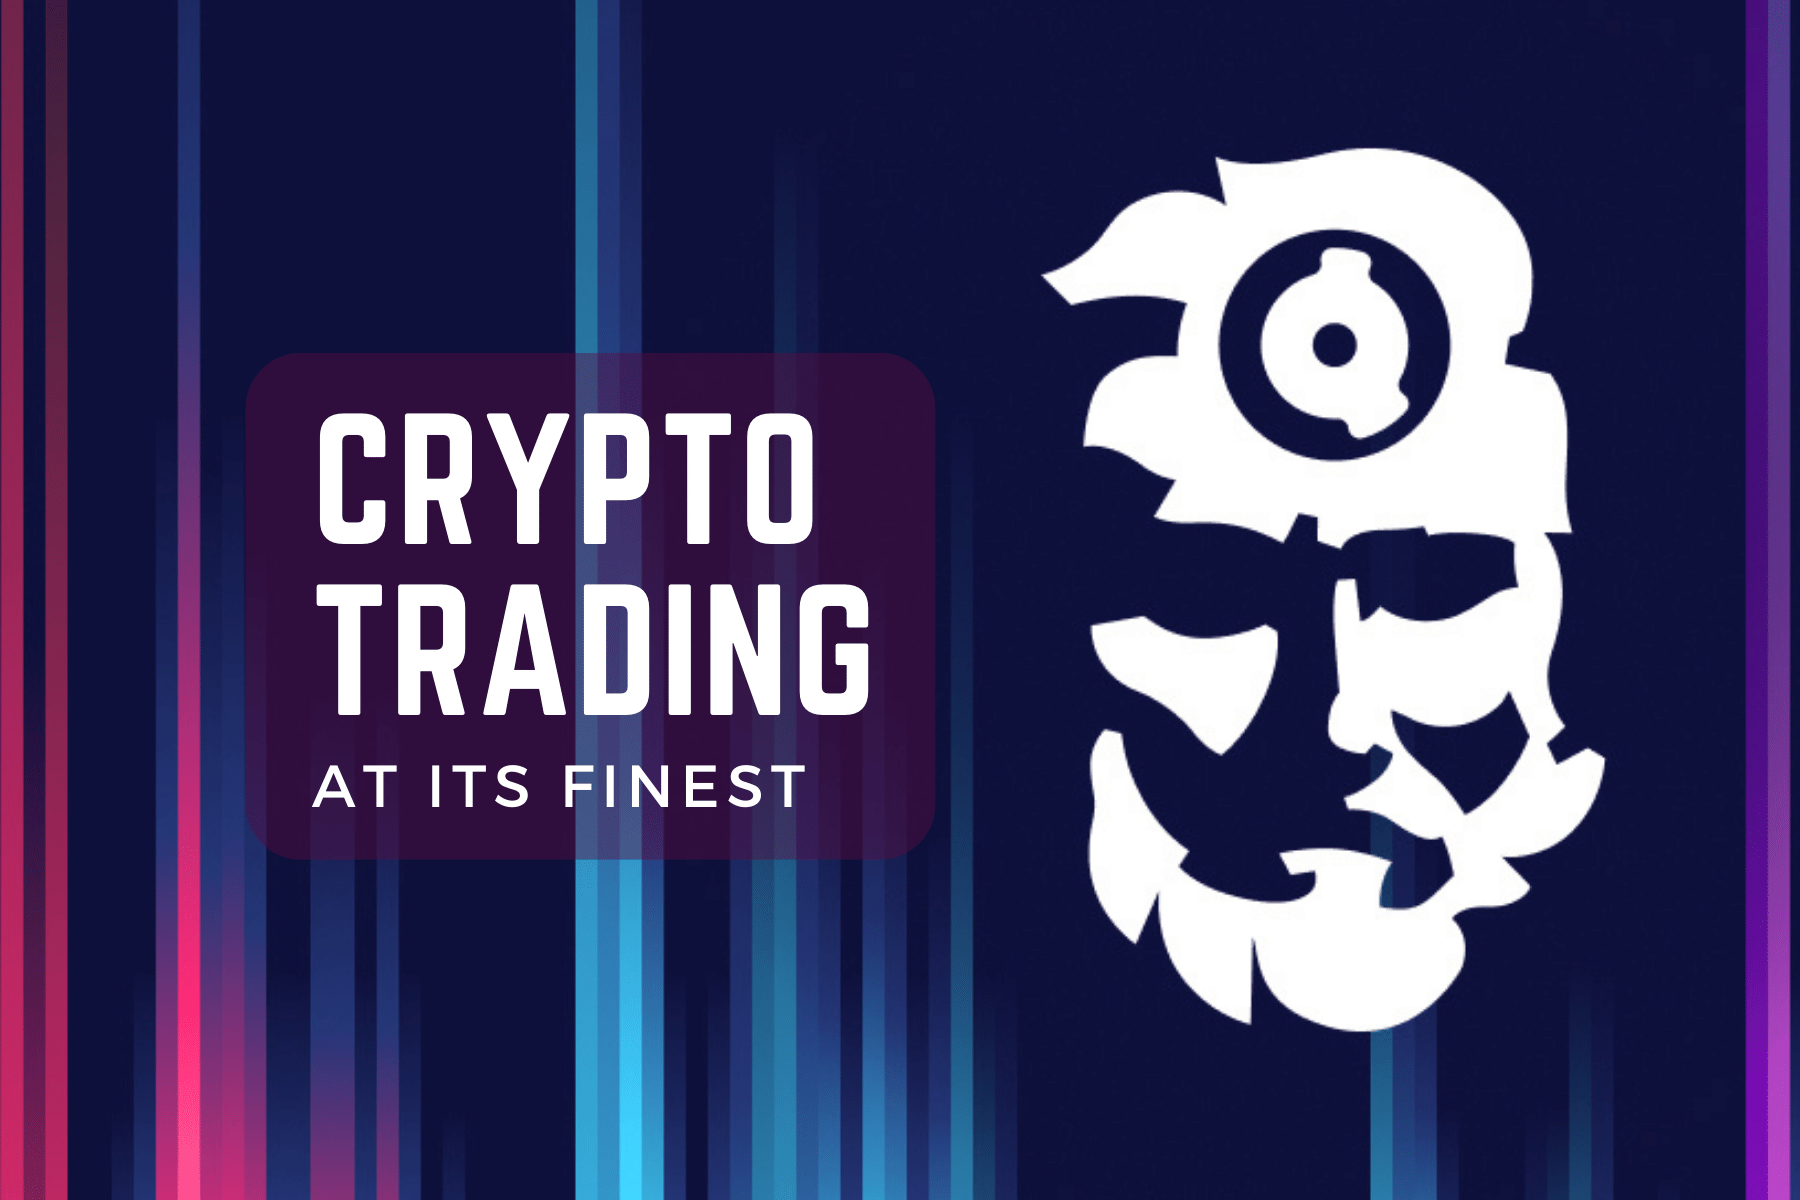 Stoic AI – Crypto Trading at its Finest